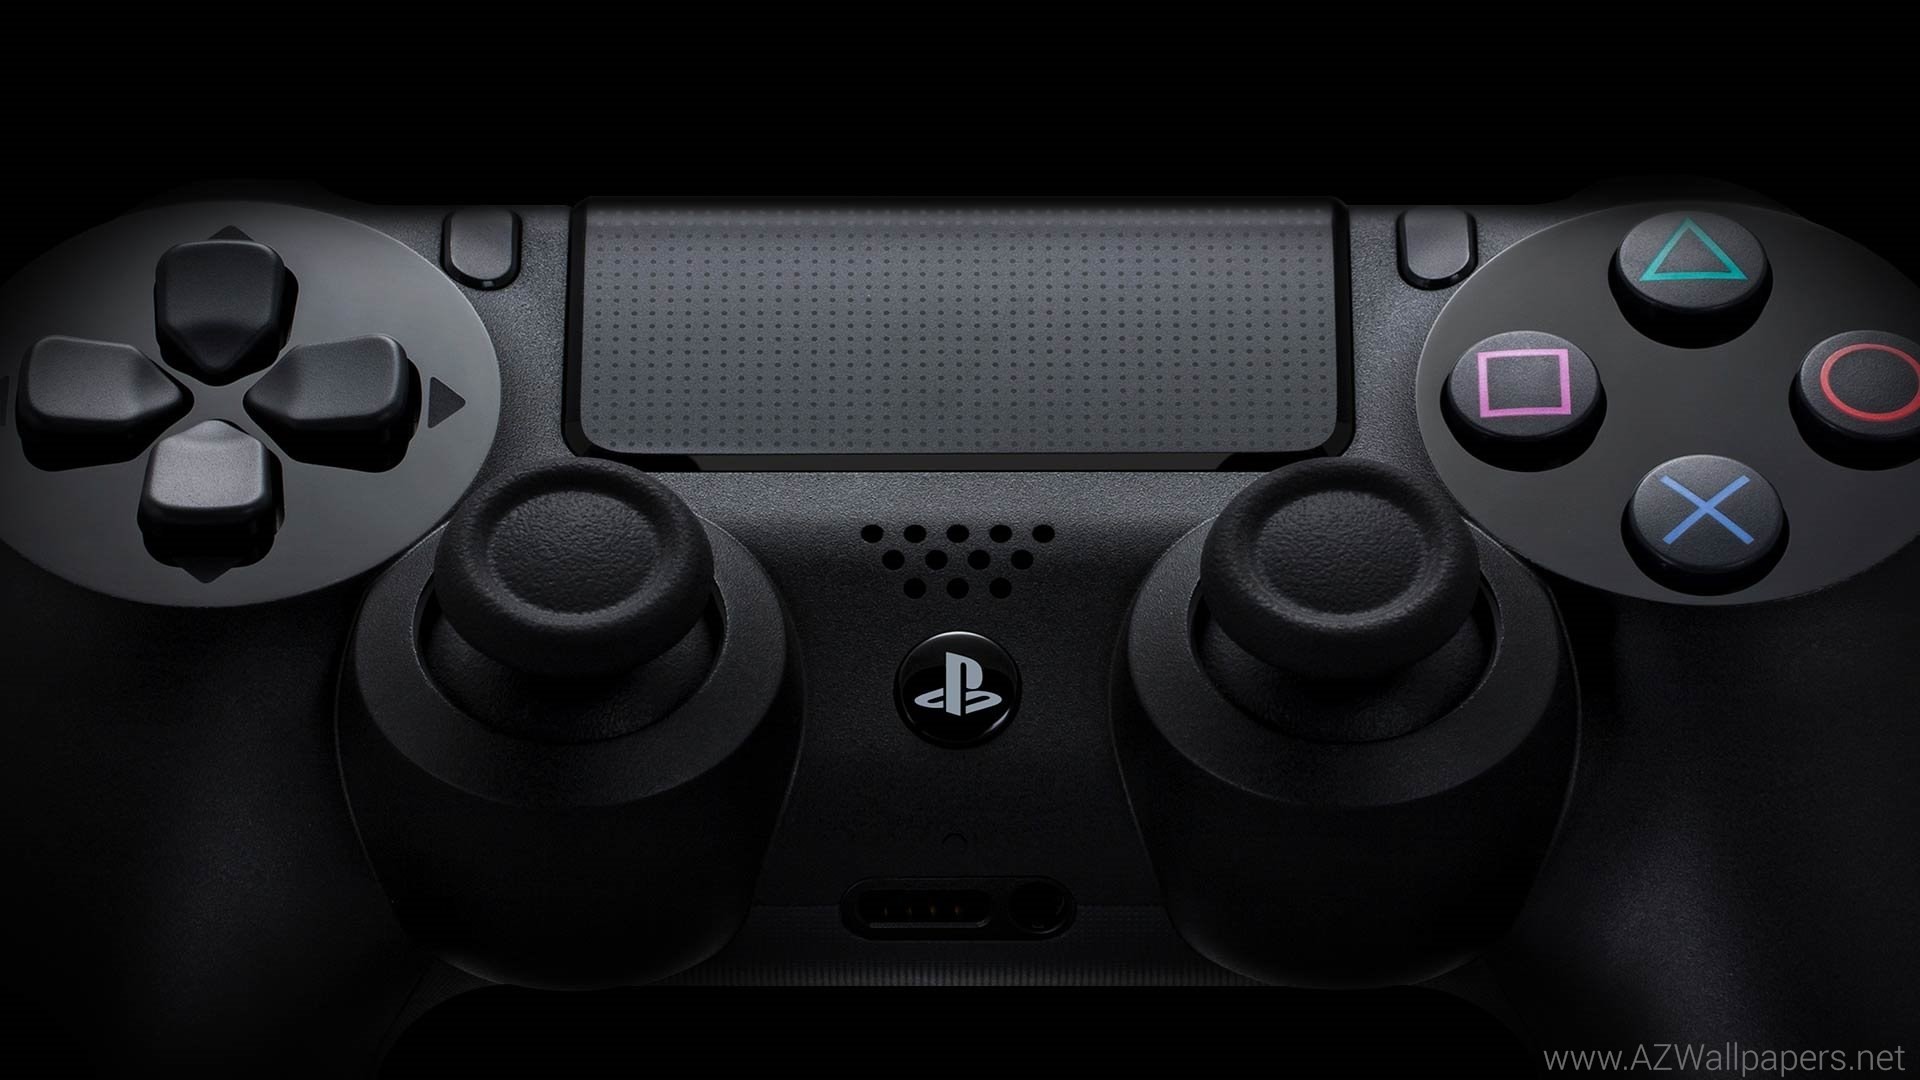 1920x1080 Download Wallpaper  Playstation 4, Console, Controller .